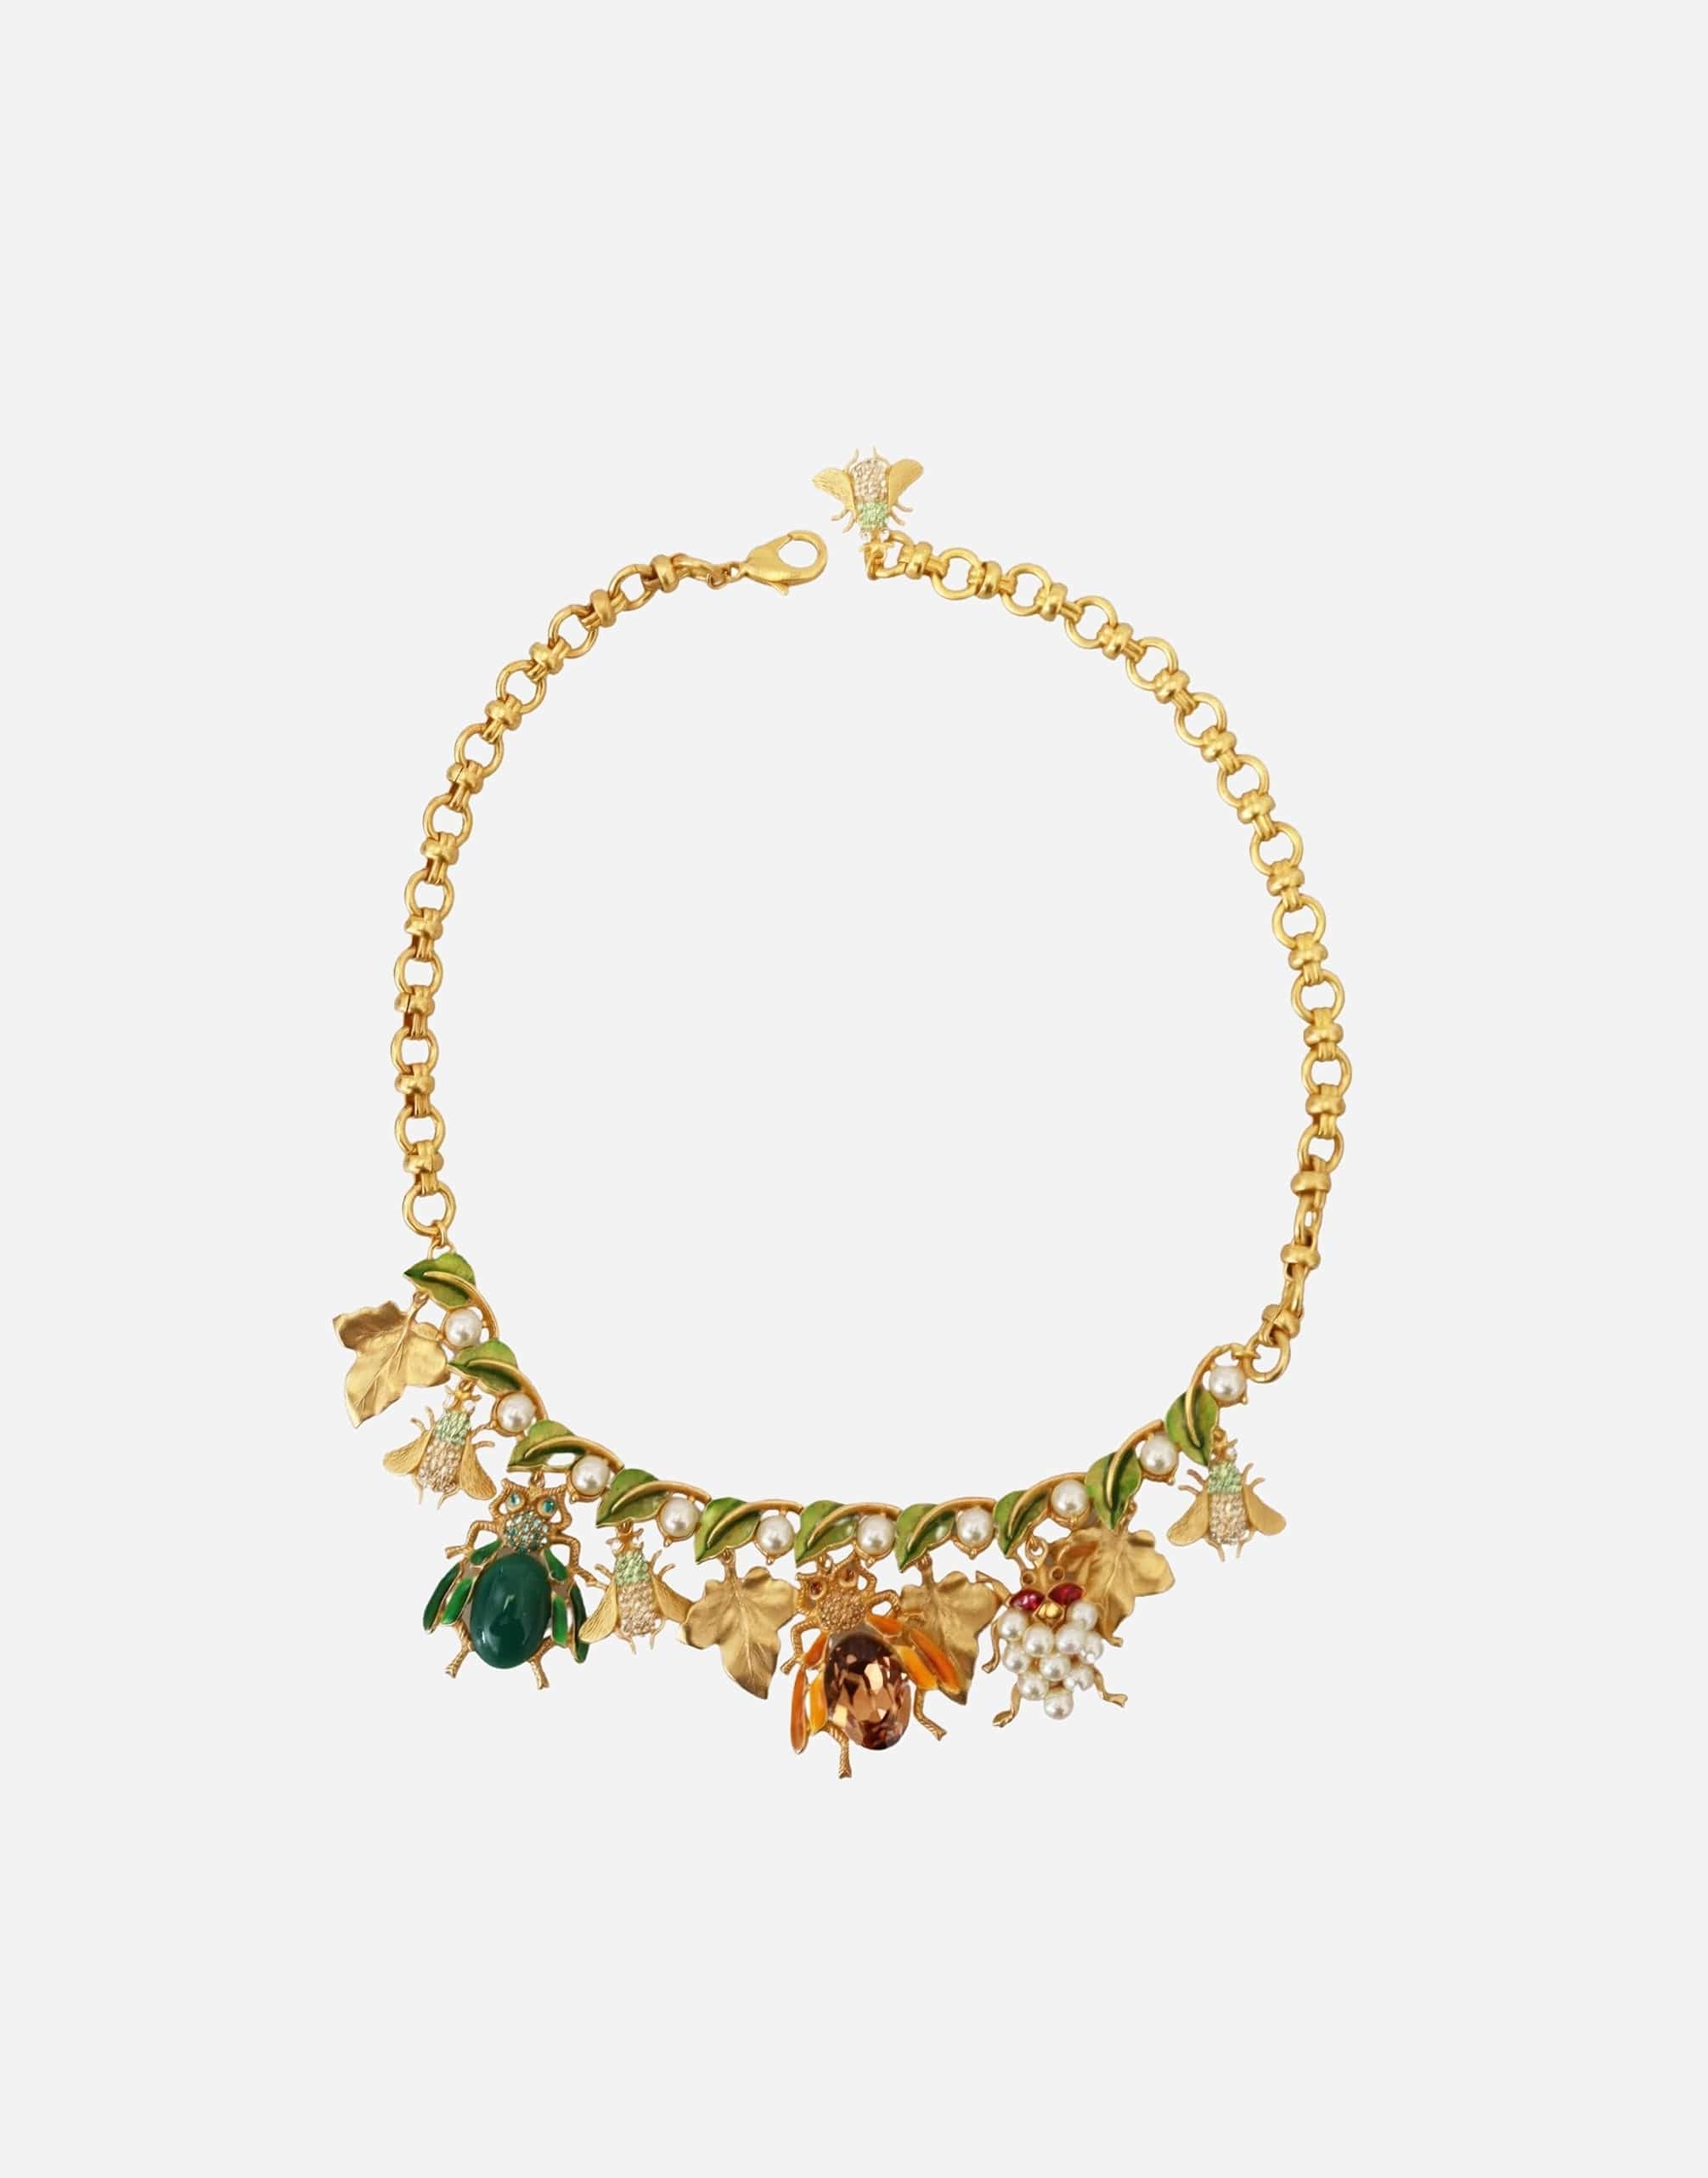 Dolce & Gabbana Insects Embellished Necklace